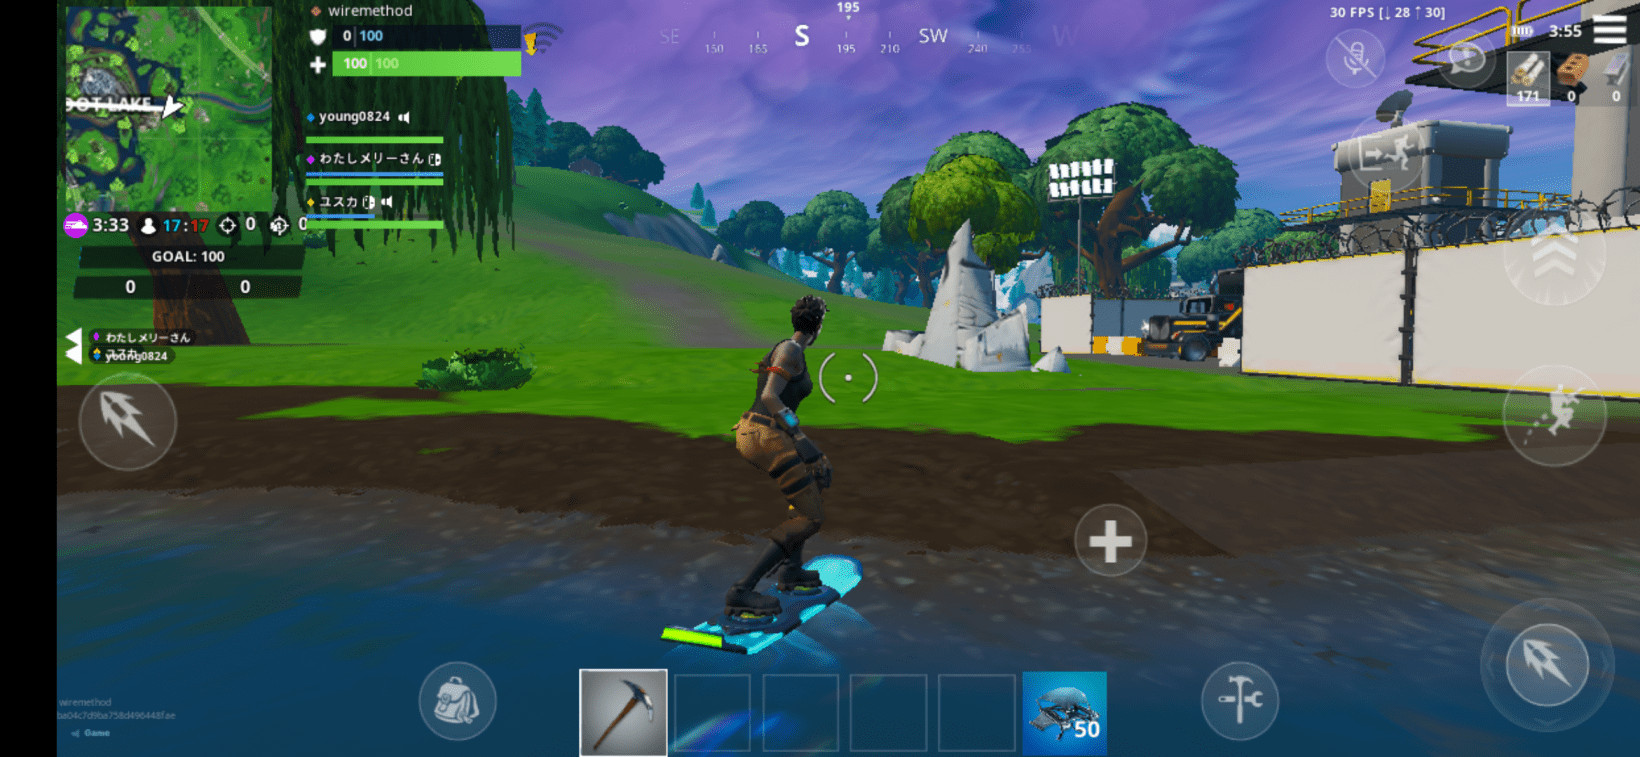 Fortnite doesn't run so great on the Mi 9 SE